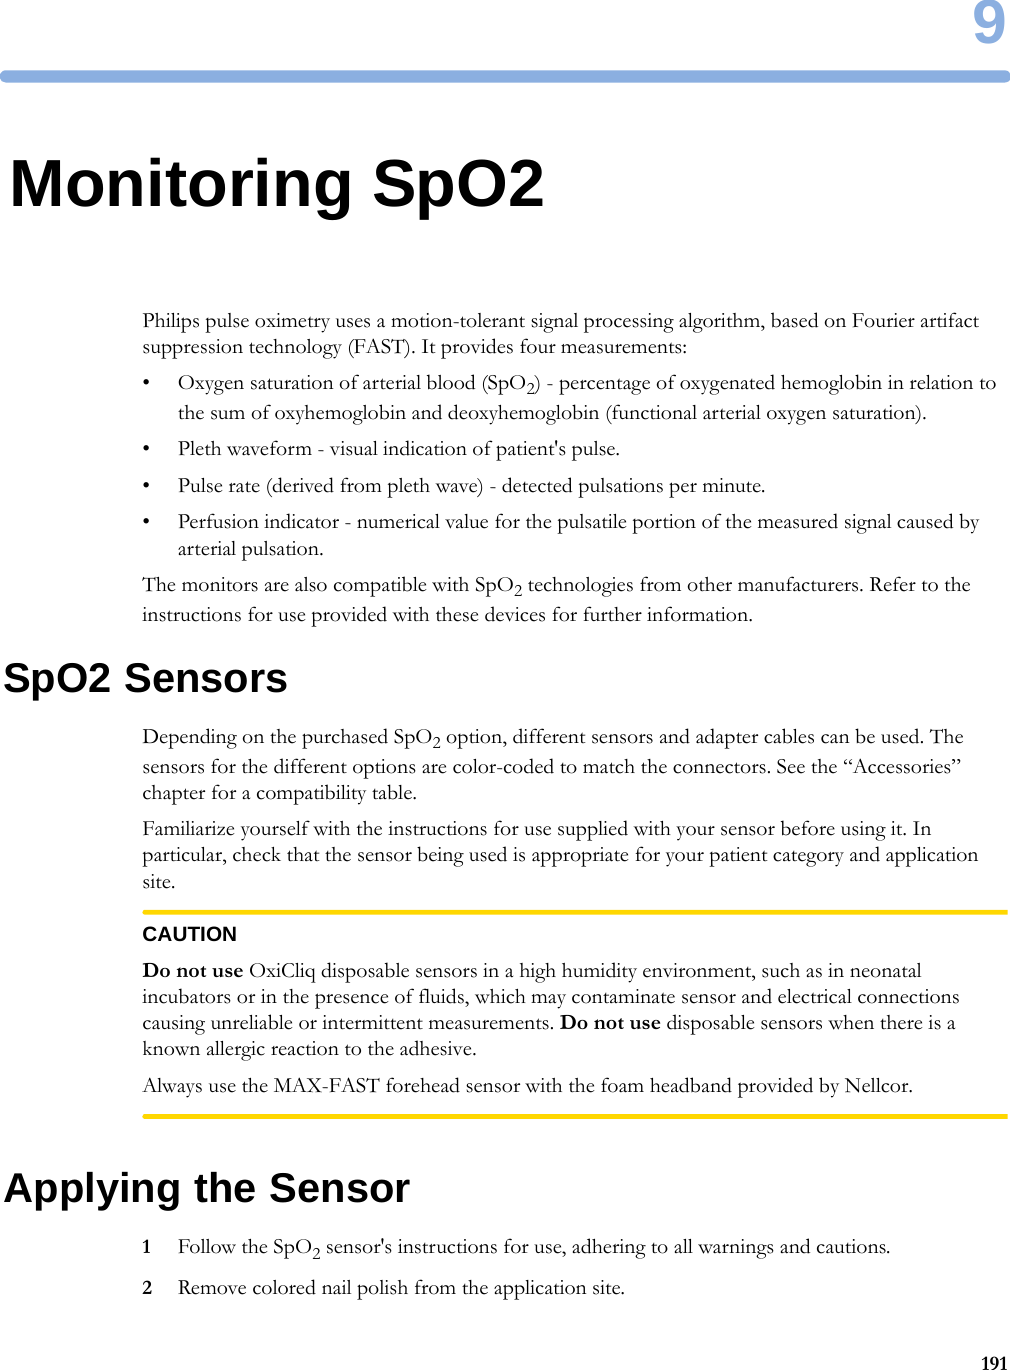 91919Monitoring SpO2Philips pulse oximetry uses a motion-tolerant signal processing algorithm, based on Fourier artifact suppression technology (FAST). It provides four measurements:• Oxygen saturation of arterial blood (SpO2) - percentage of oxygenated hemoglobin in relation to the sum of oxyhemoglobin and deoxyhemoglobin (functional arterial oxygen saturation).• Pleth waveform - visual indication of patient&apos;s pulse.• Pulse rate (derived from pleth wave) - detected pulsations per minute.• Perfusion indicator - numerical value for the pulsatile portion of the measured signal caused by arterial pulsation.The monitors are also compatible with SpO2 technologies from other manufacturers. Refer to the instructions for use provided with these devices for further information.SpO2 SensorsDepending on the purchased SpO2 option, different sensors and adapter cables can be used. The sensors for the different options are color-coded to match the connectors. See the “Accessories” chapter for a compatibility table.Familiarize yourself with the instructions for use supplied with your sensor before using it. In particular, check that the sensor being used is appropriate for your patient category and application site.CAUTIONDo not use OxiCliq disposable sensors in a high humidity environment, such as in neonatal incubators or in the presence of fluids, which may contaminate sensor and electrical connections causing unreliable or intermittent measurements. Do not use disposable sensors when there is a known allergic reaction to the adhesive.Always use the MAX-FAST forehead sensor with the foam headband provided by Nellcor.Applying the Sensor1Follow the SpO2 sensor&apos;s instructions for use, adhering to all warnings and cautions.2Remove colored nail polish from the application site.